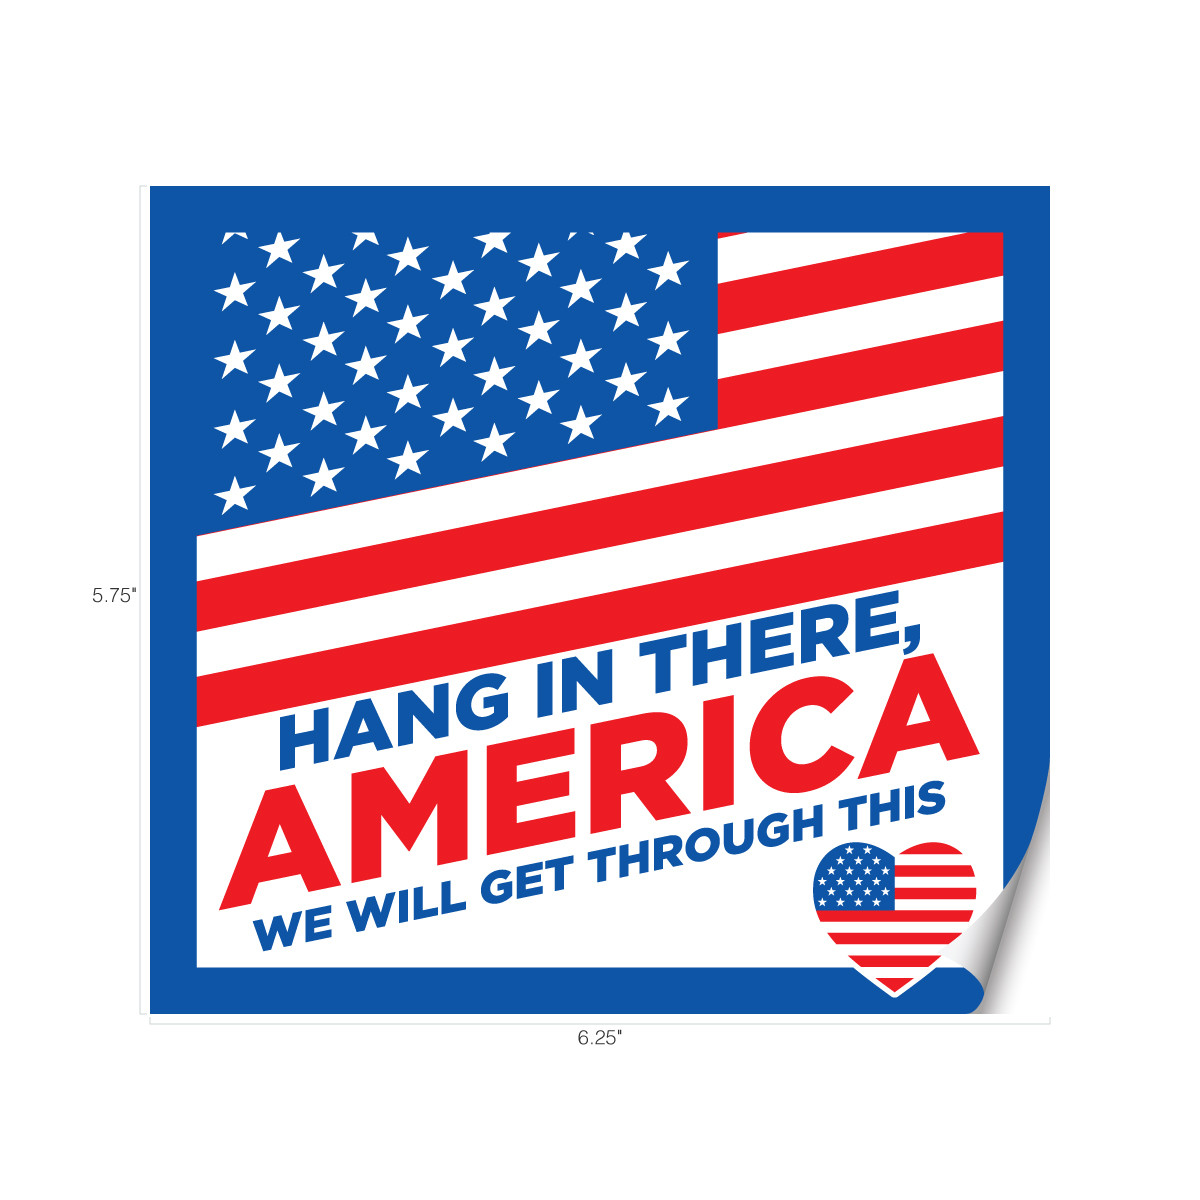 Hang in there America 5.75" x 6.25" Window Clings